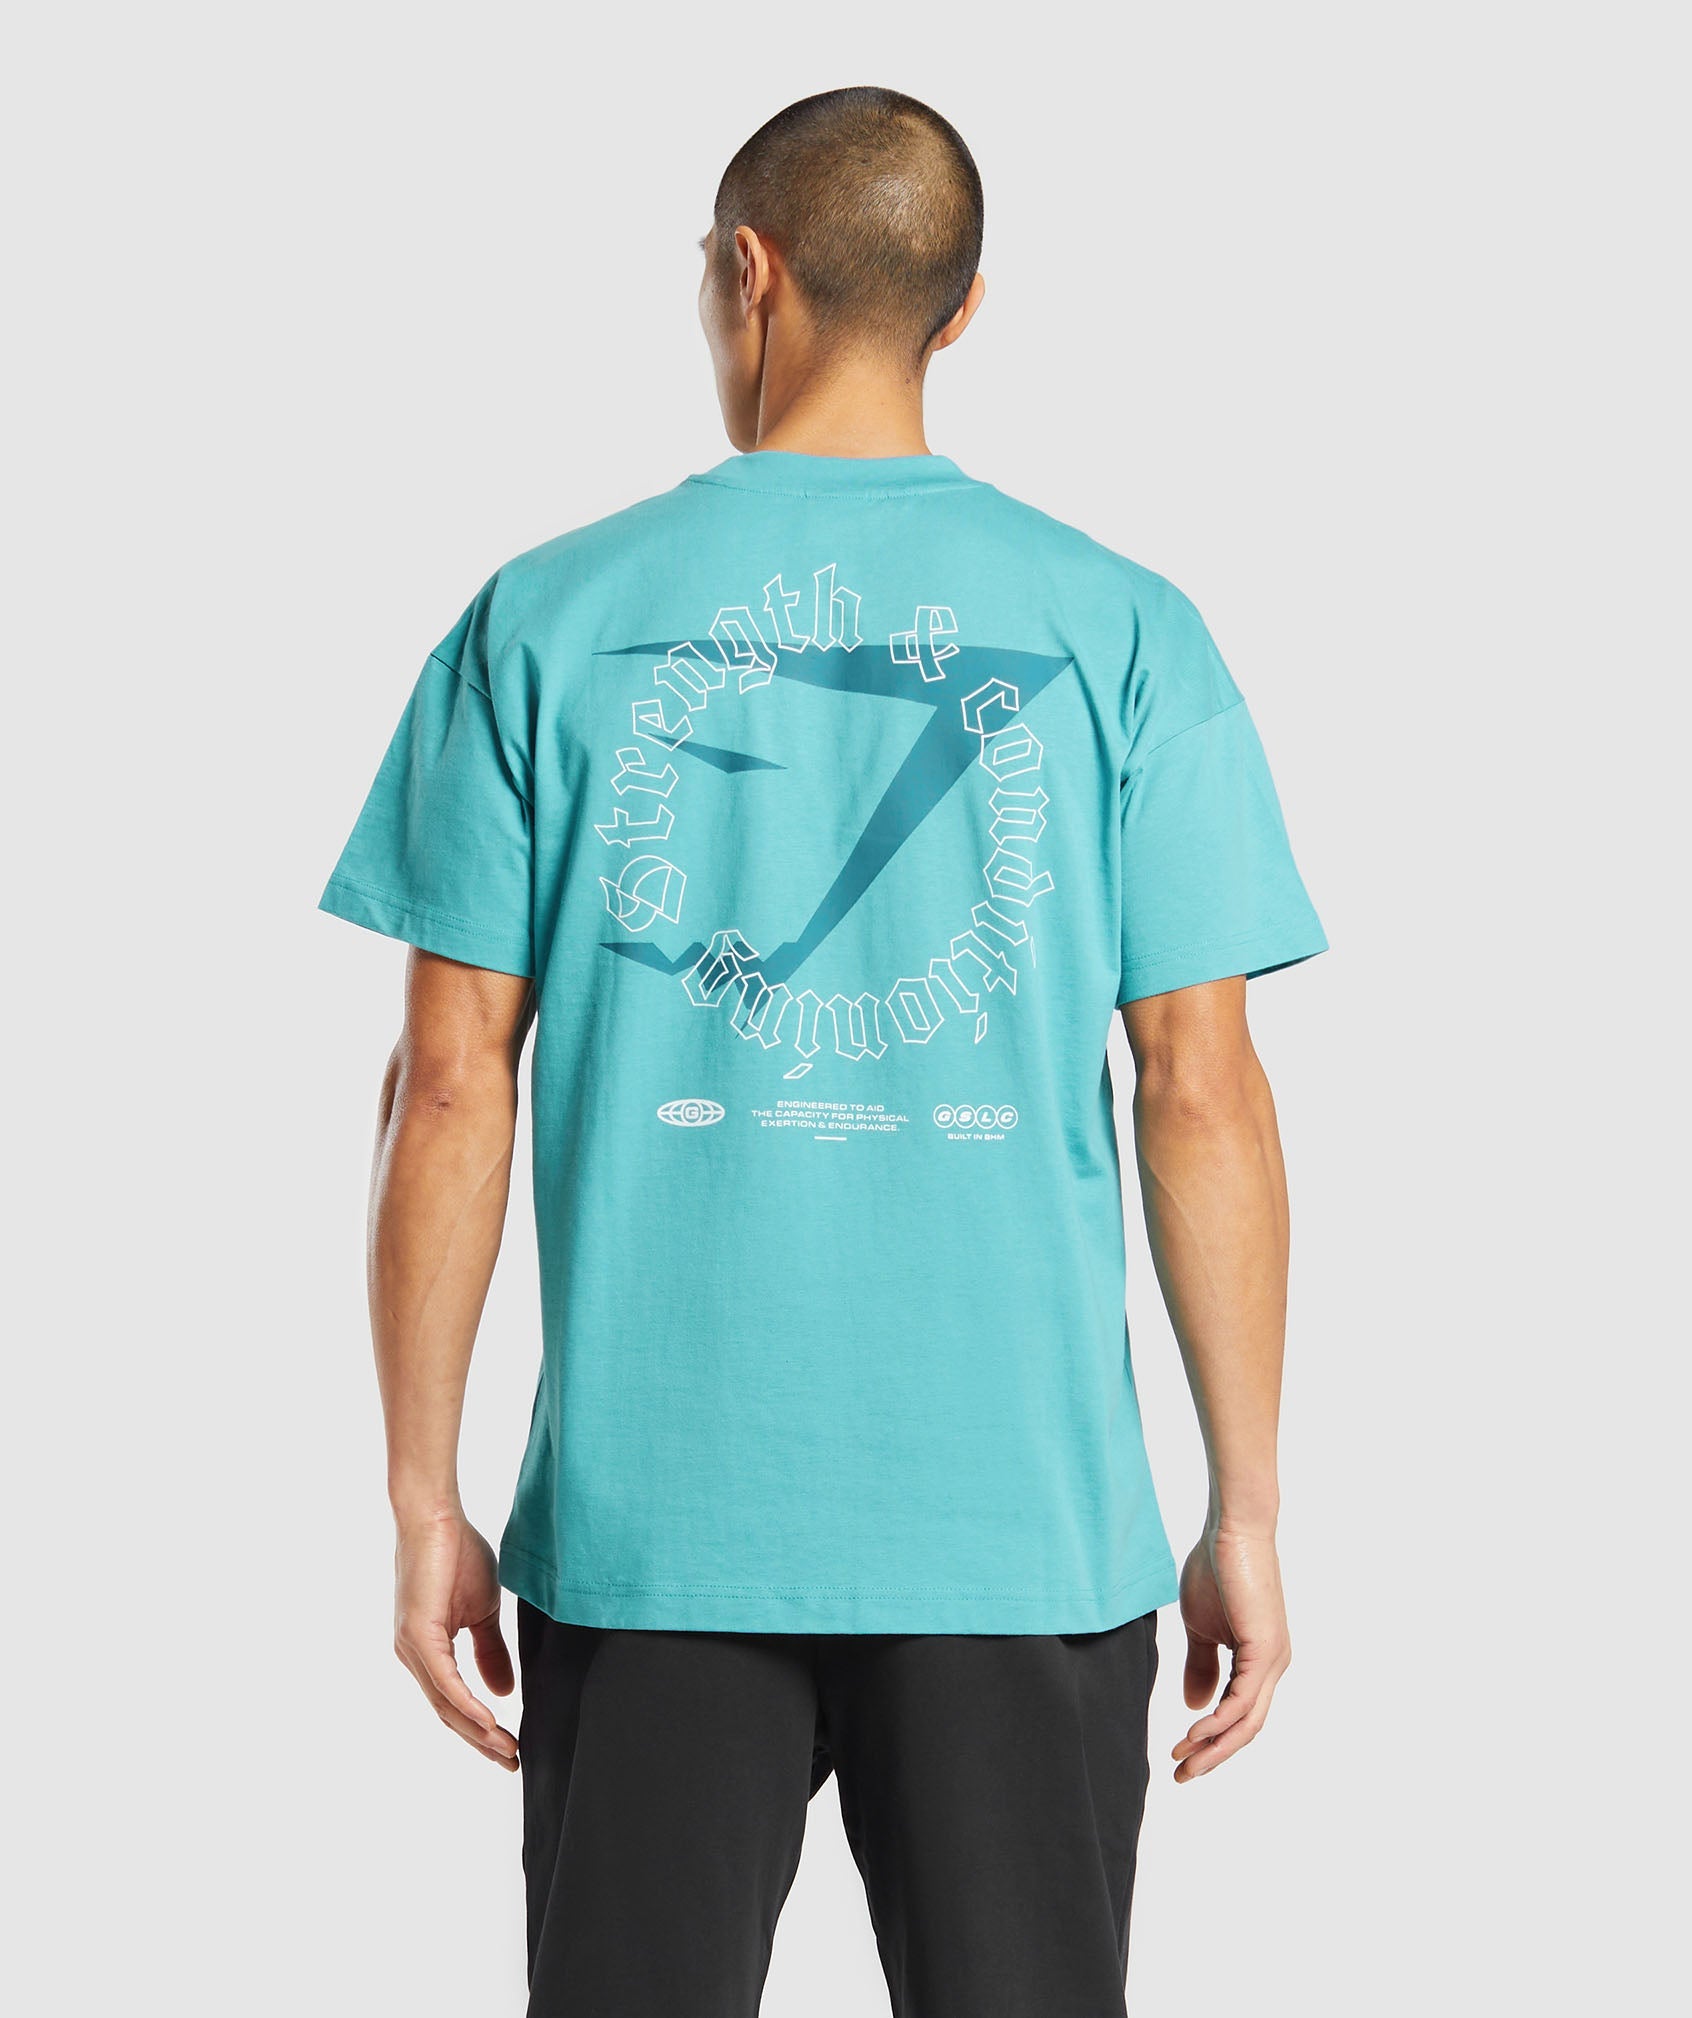 Strength and Conditioning T-Shirt in Artificial Teal - view 1